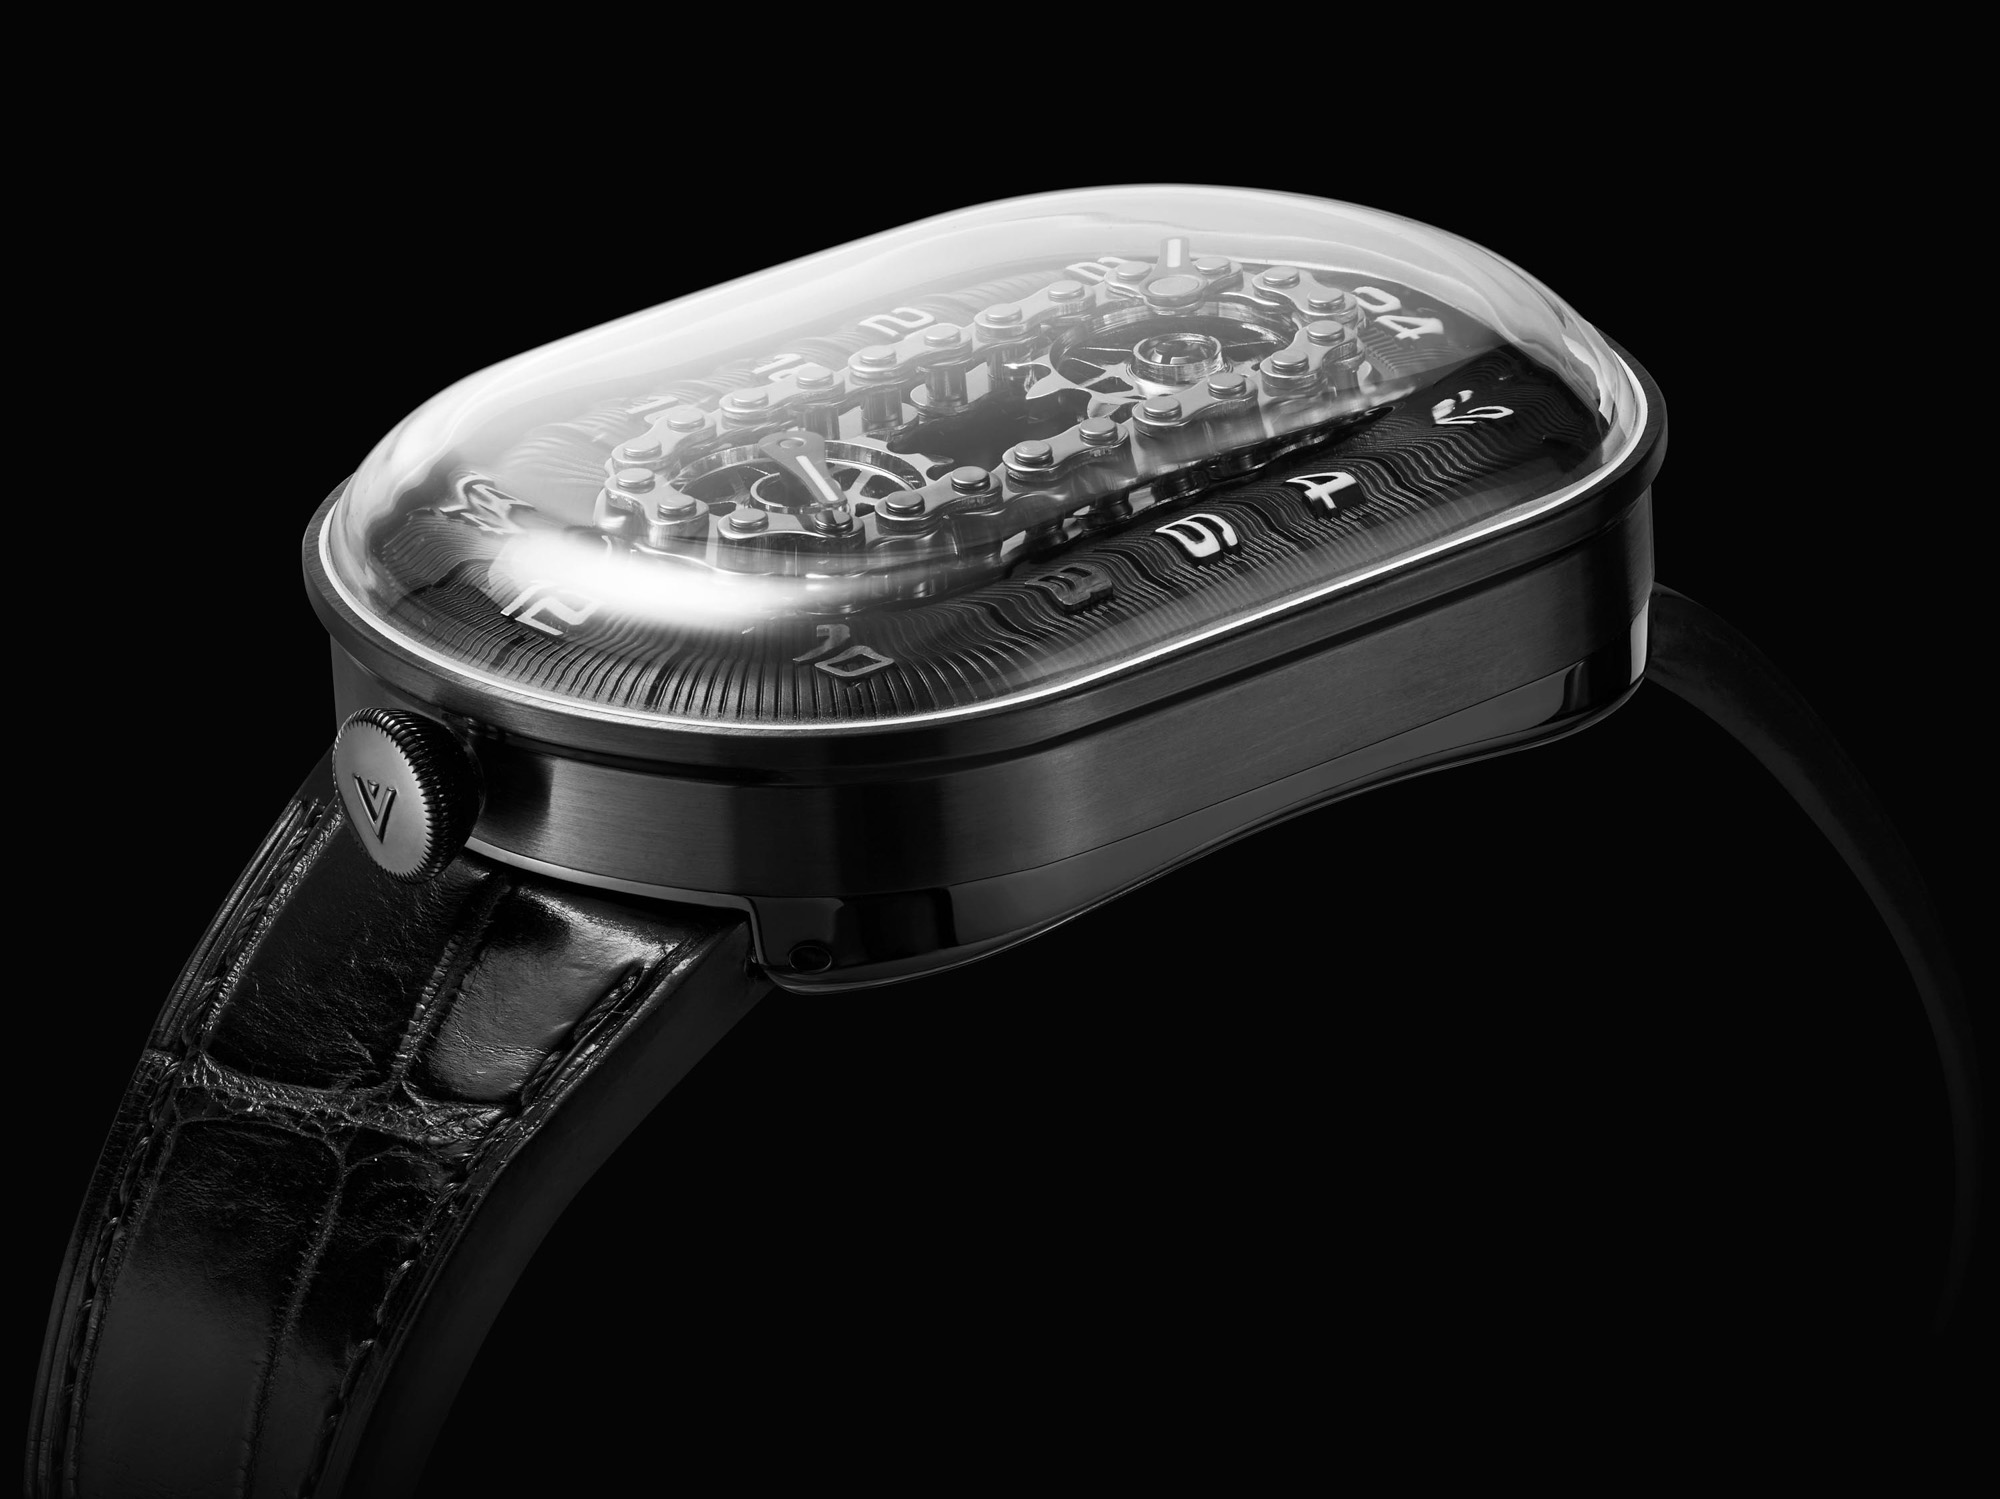 Angles Watches Reimagines The 24-Hour Display With The Chain Of Time aBlogtoWatch